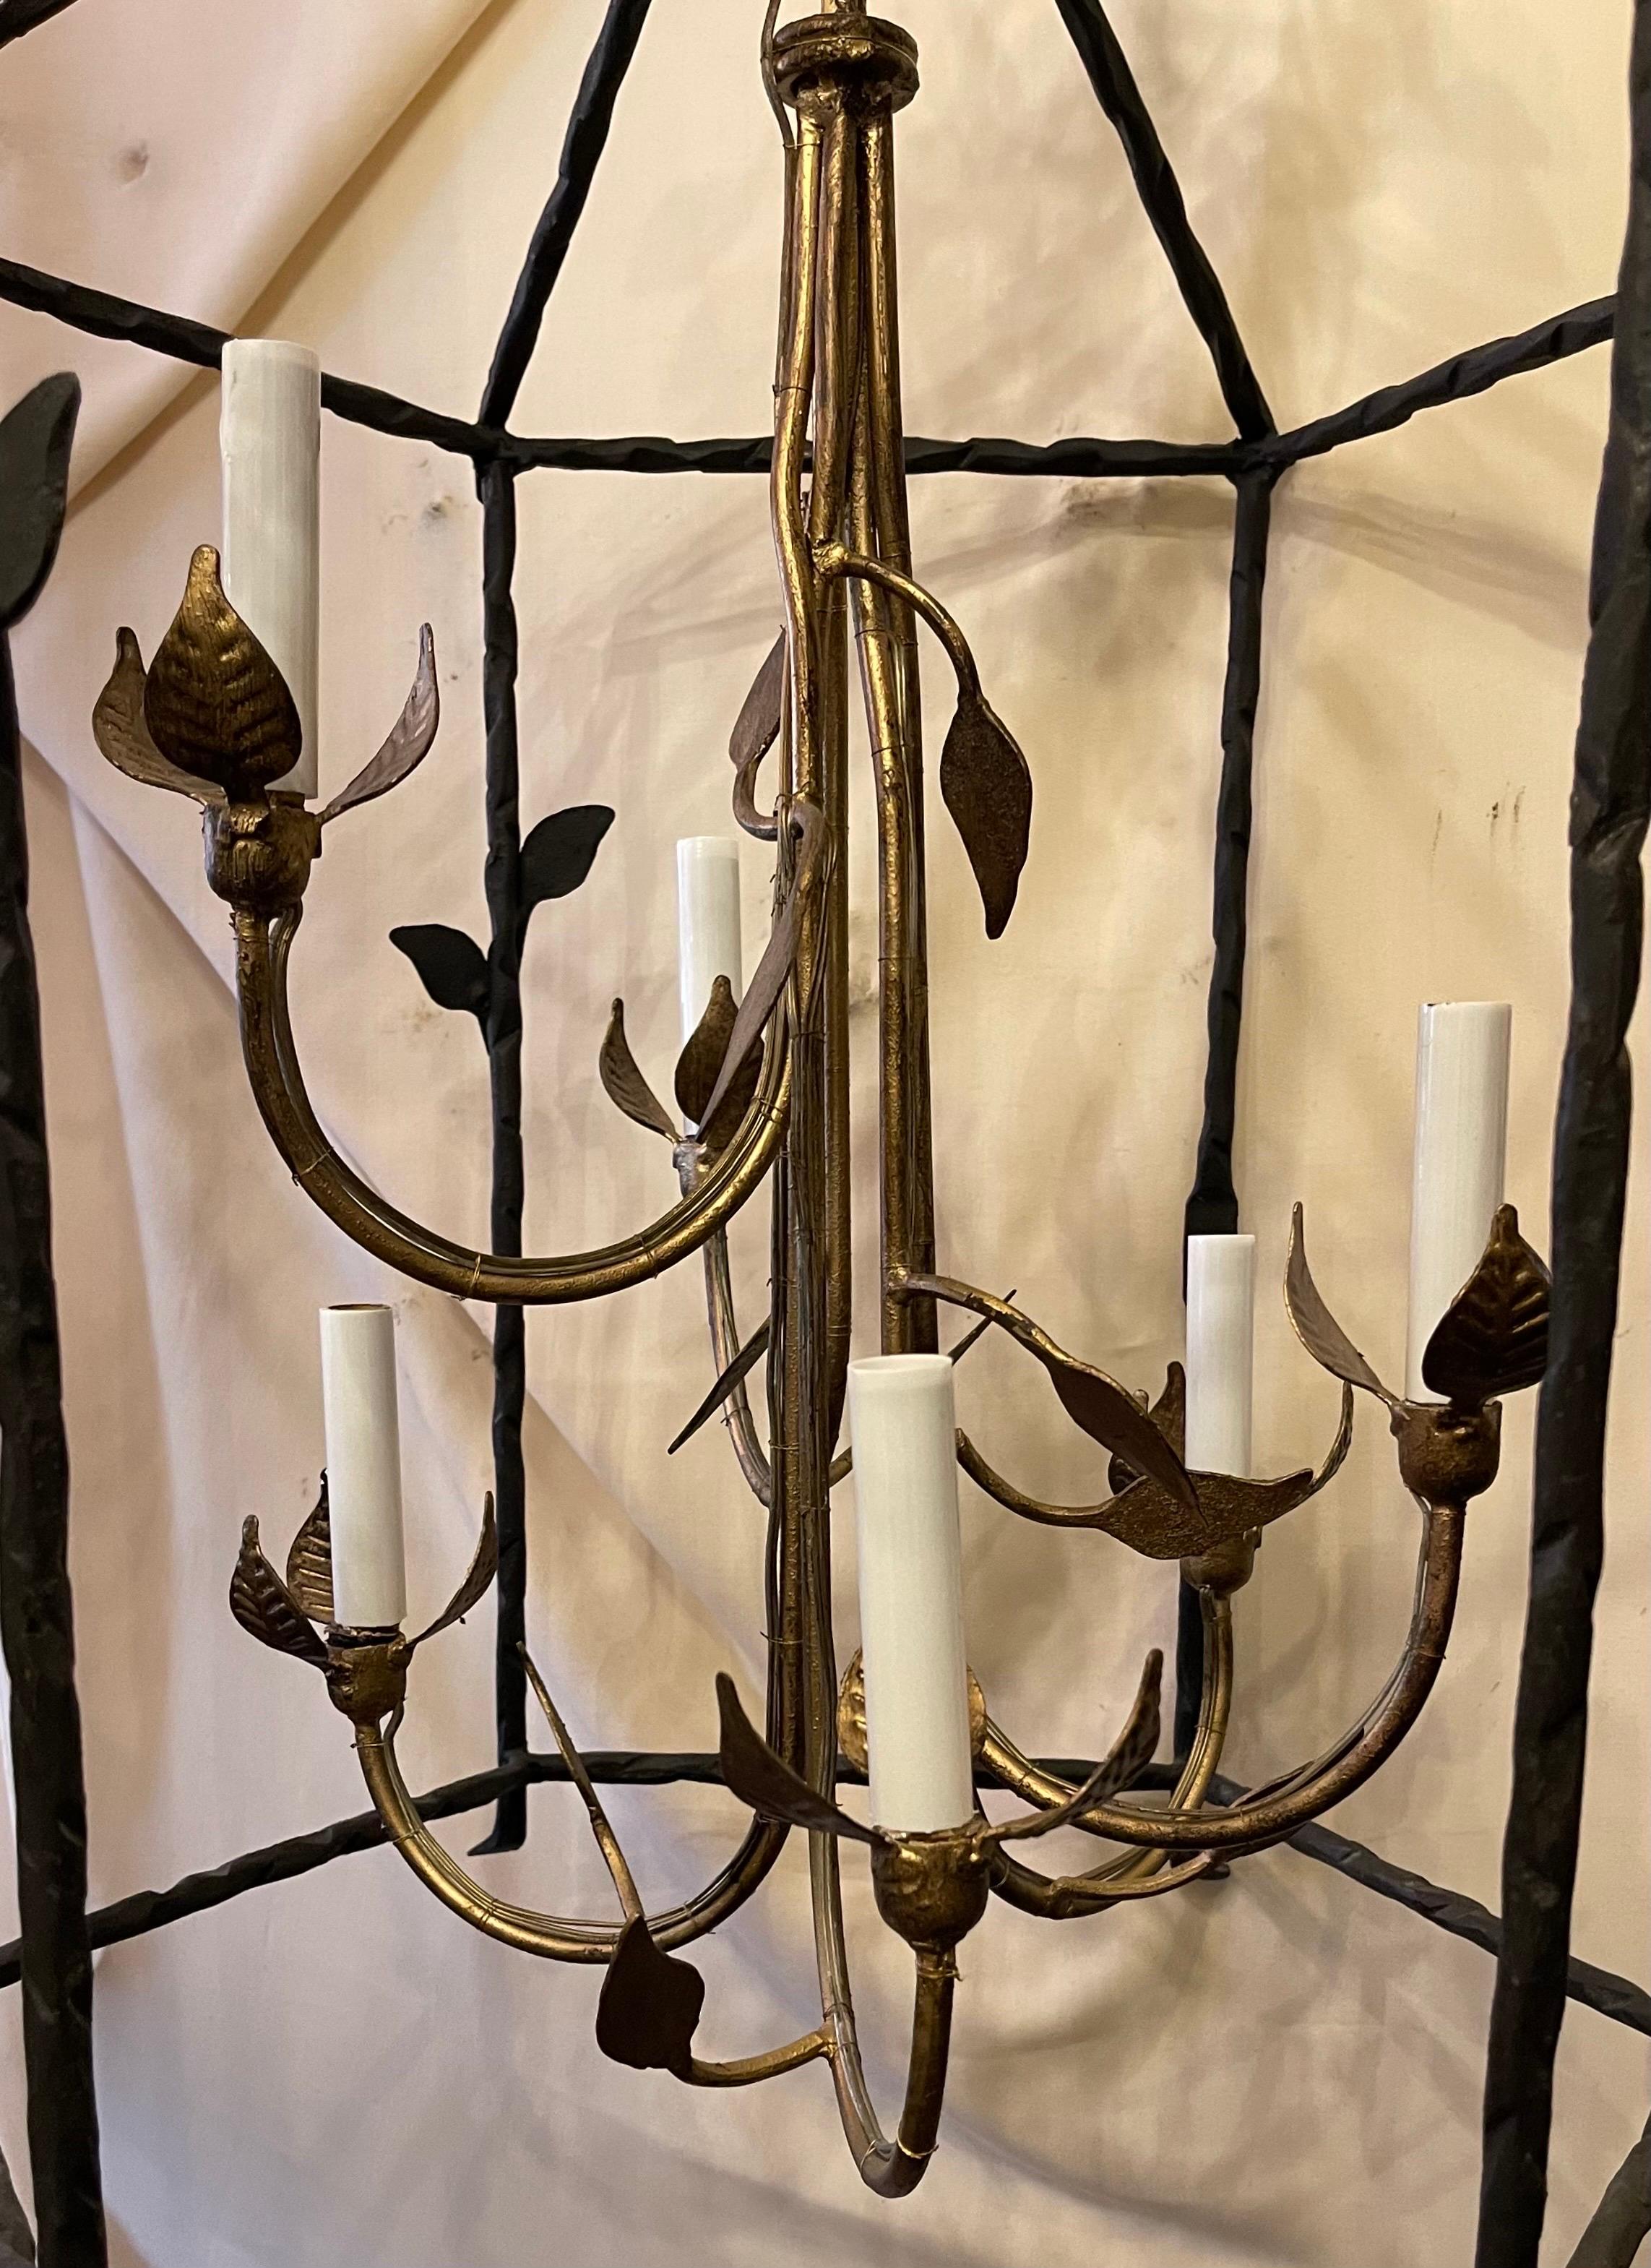 Wonderful Pair Six Light Gilt Iron Lantern Chandeliers Manner Of Giacometti In Good Condition For Sale In Roslyn, NY